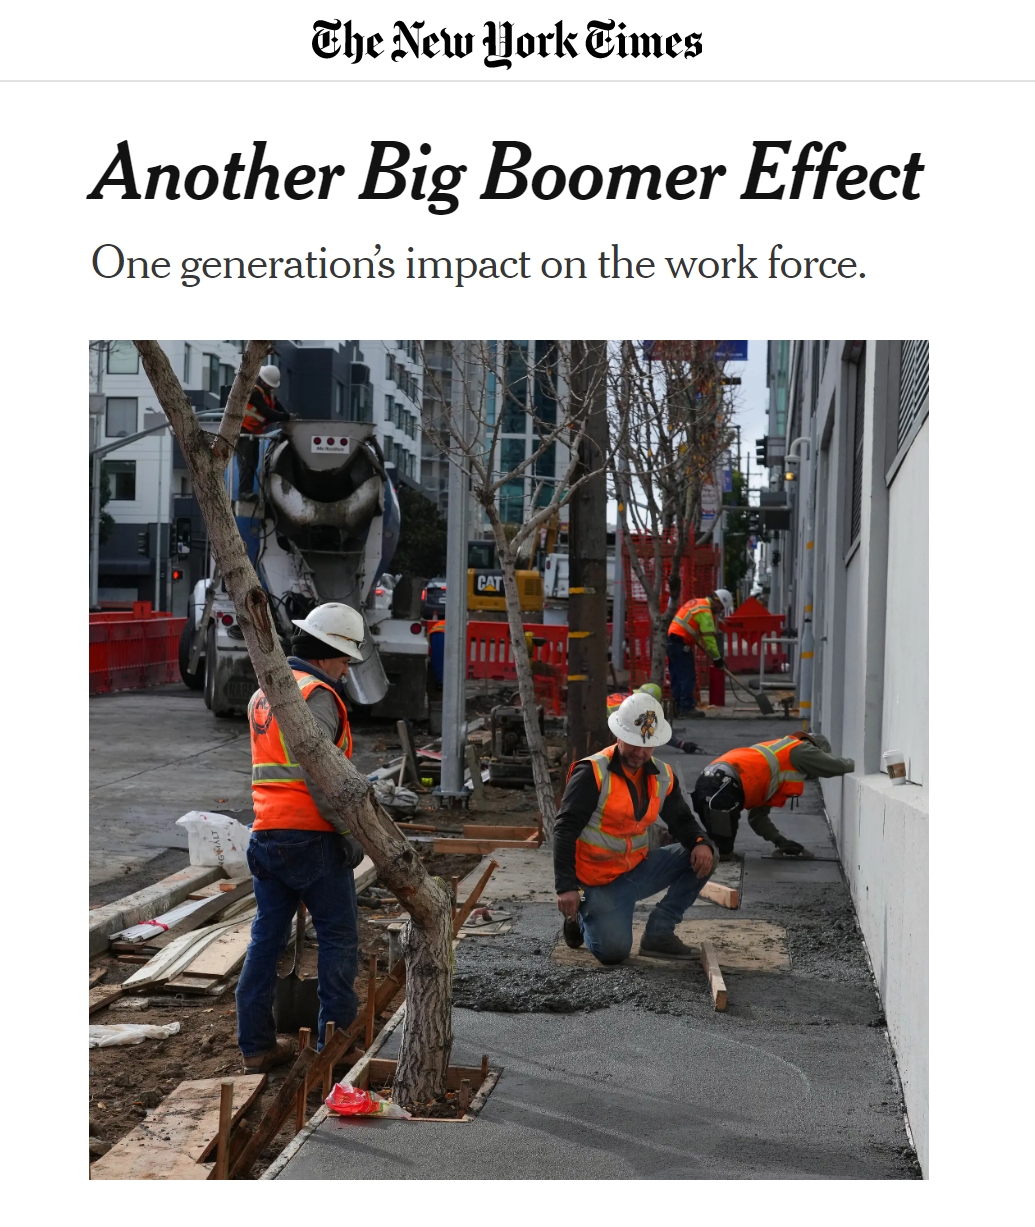 NYT: Another Big Boomer Effect